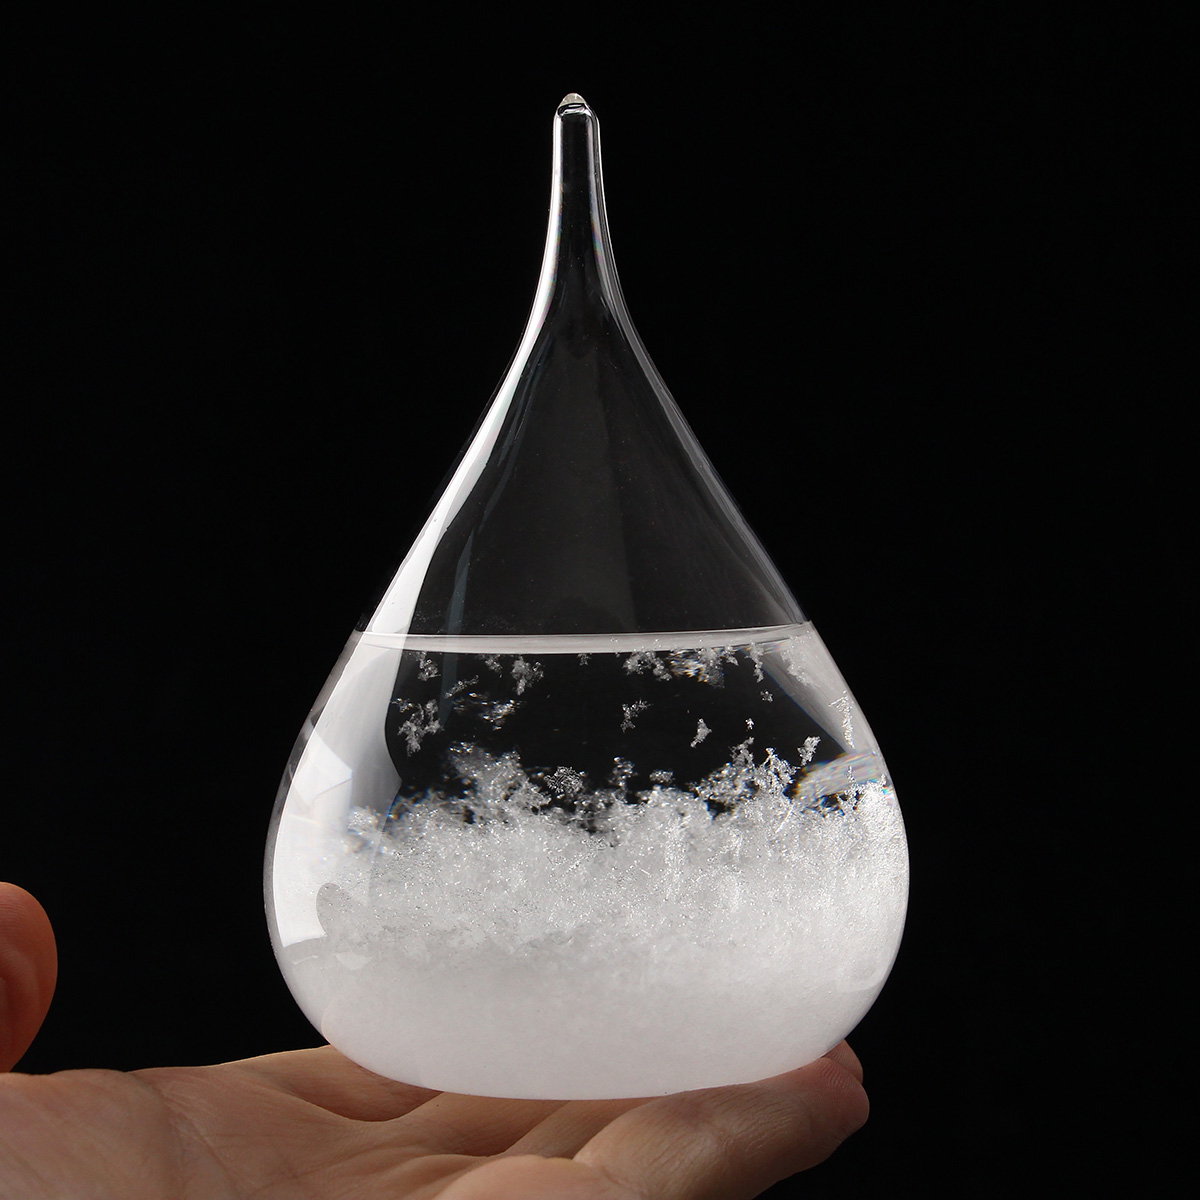 Weather-Forecast-Crystal-Storm-Glass-Home-Decor-Christmas-Gift-1113617-1